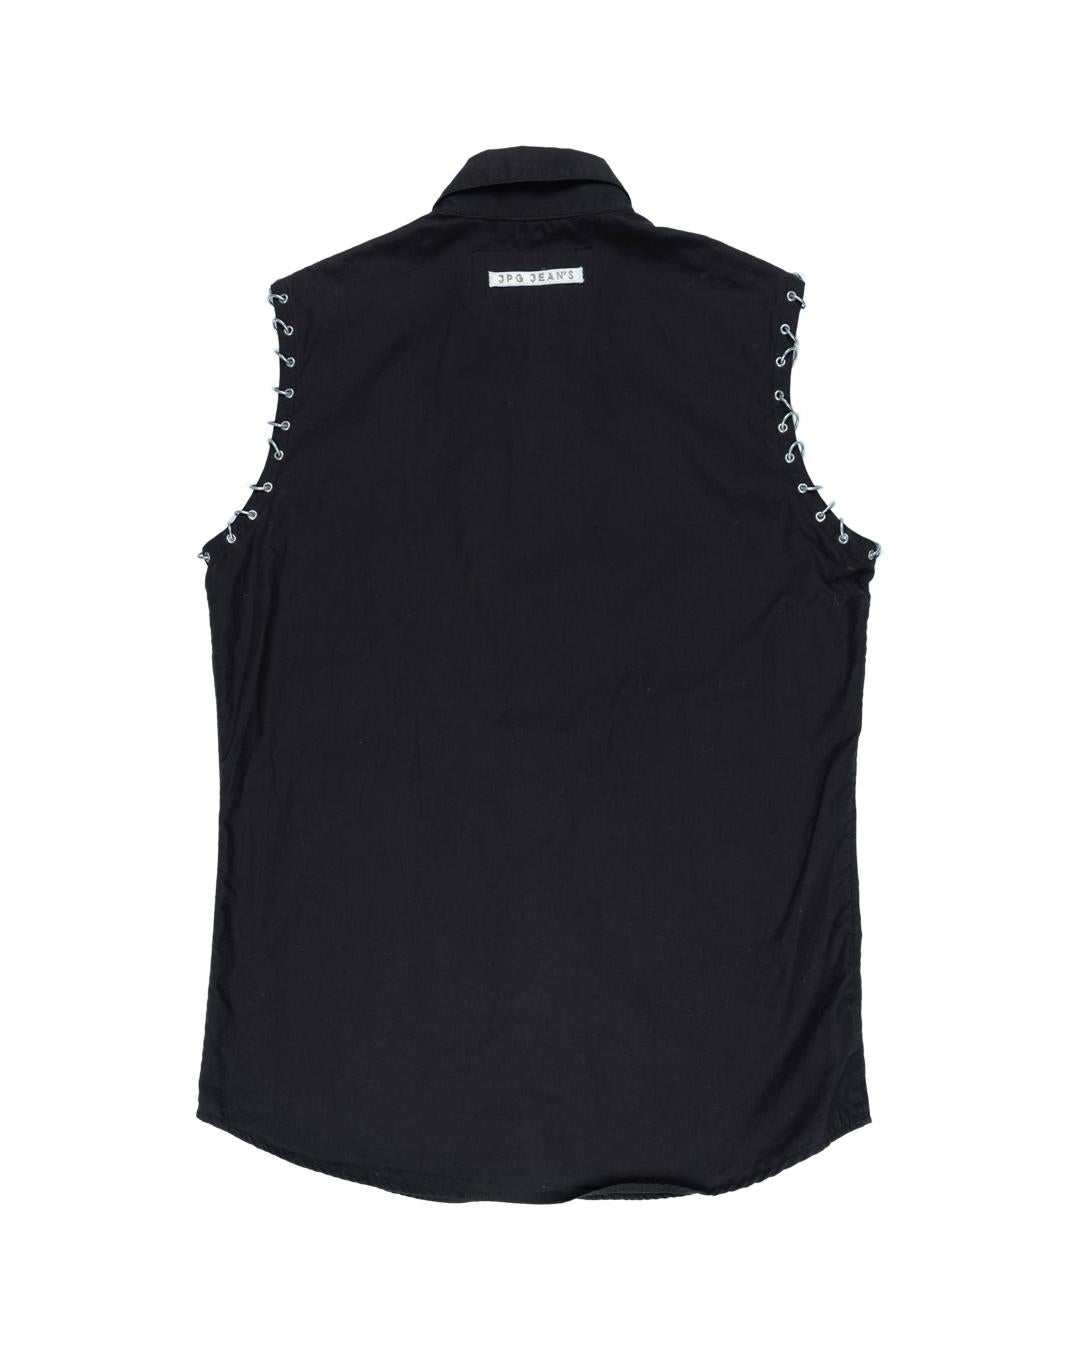 Jean Paul Gaultier Pierced Sleeveless Shirt In Good Condition For Sale In Beverly Hills, CA